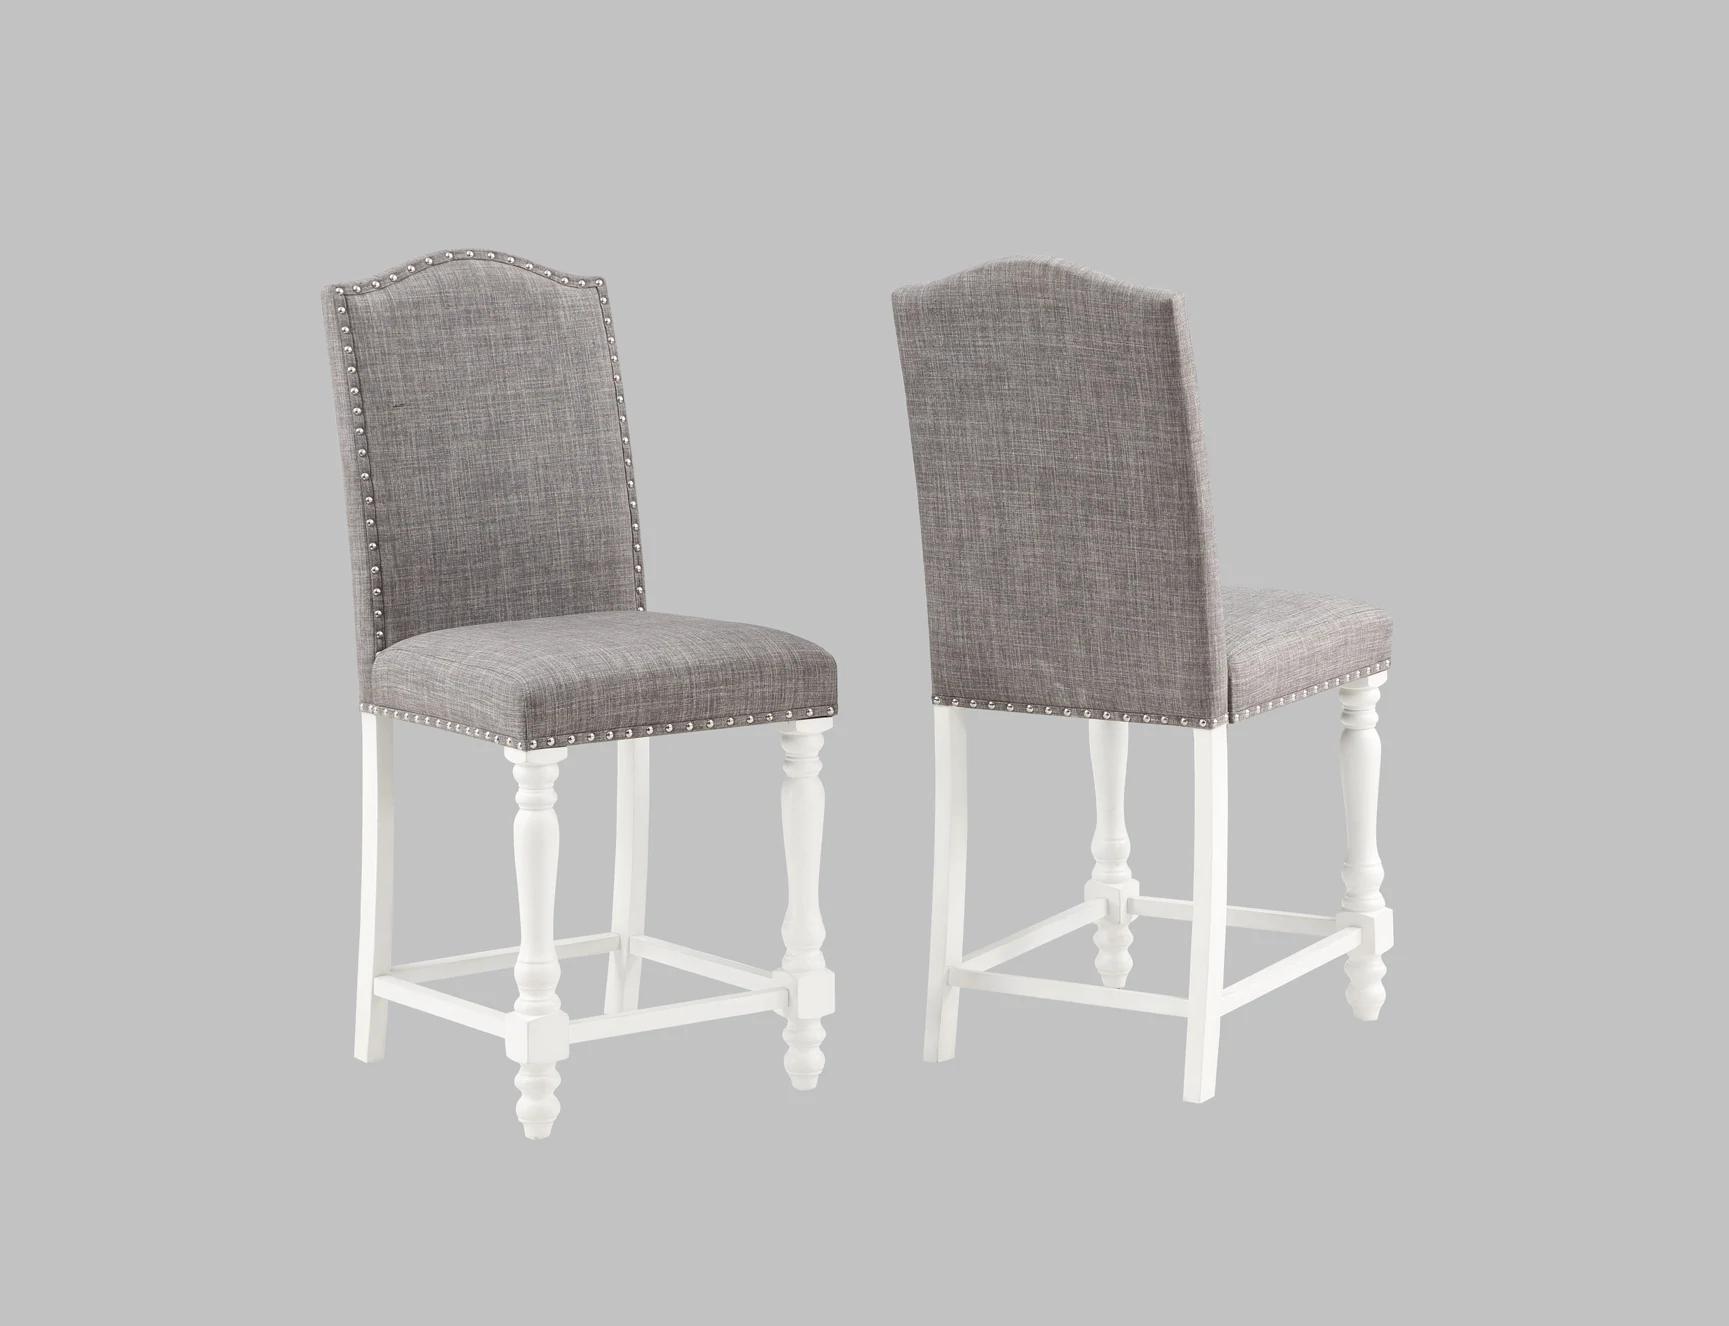 Traditional, Farmhouse Counter Chair Set Langley 2766CG-S-24-2pcs in White and Gray Linen